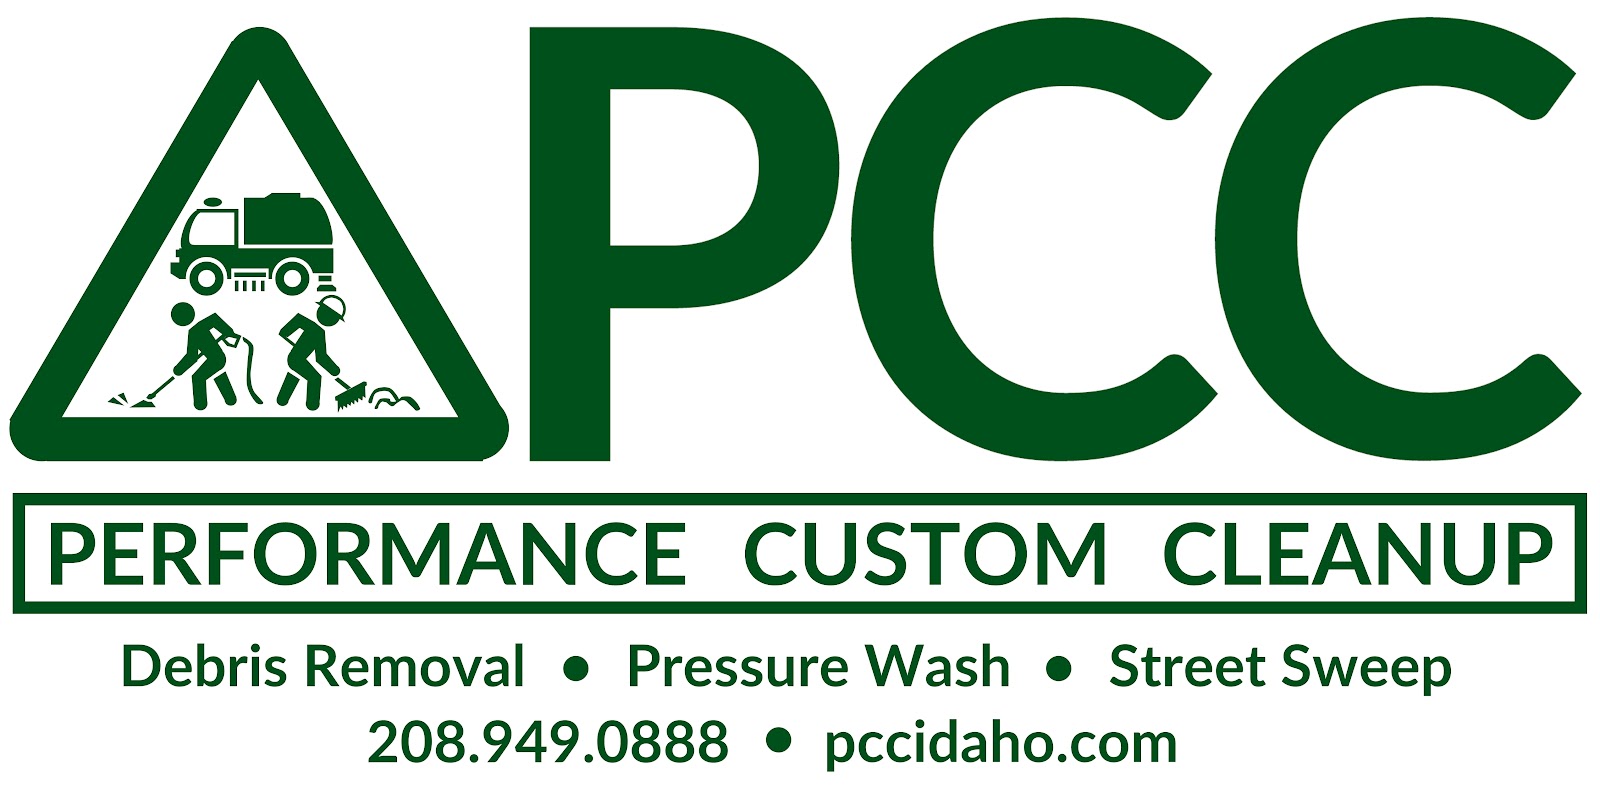 PCC Home - Process Combustion Corporation